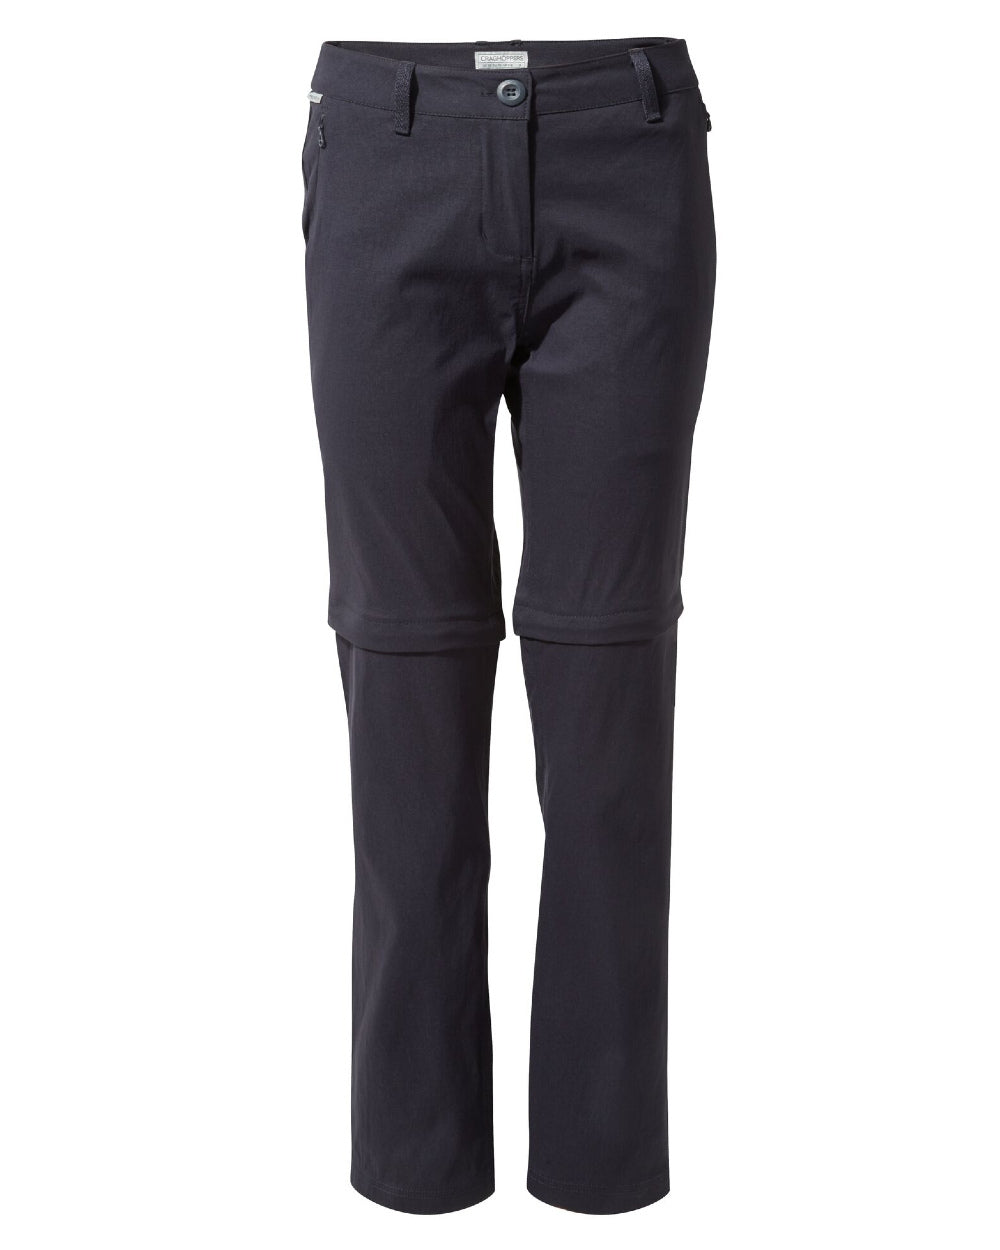 Dark Navy Coloured Craghoppers Womens Kiwi Pro II Convertible Trousers On A White Background 